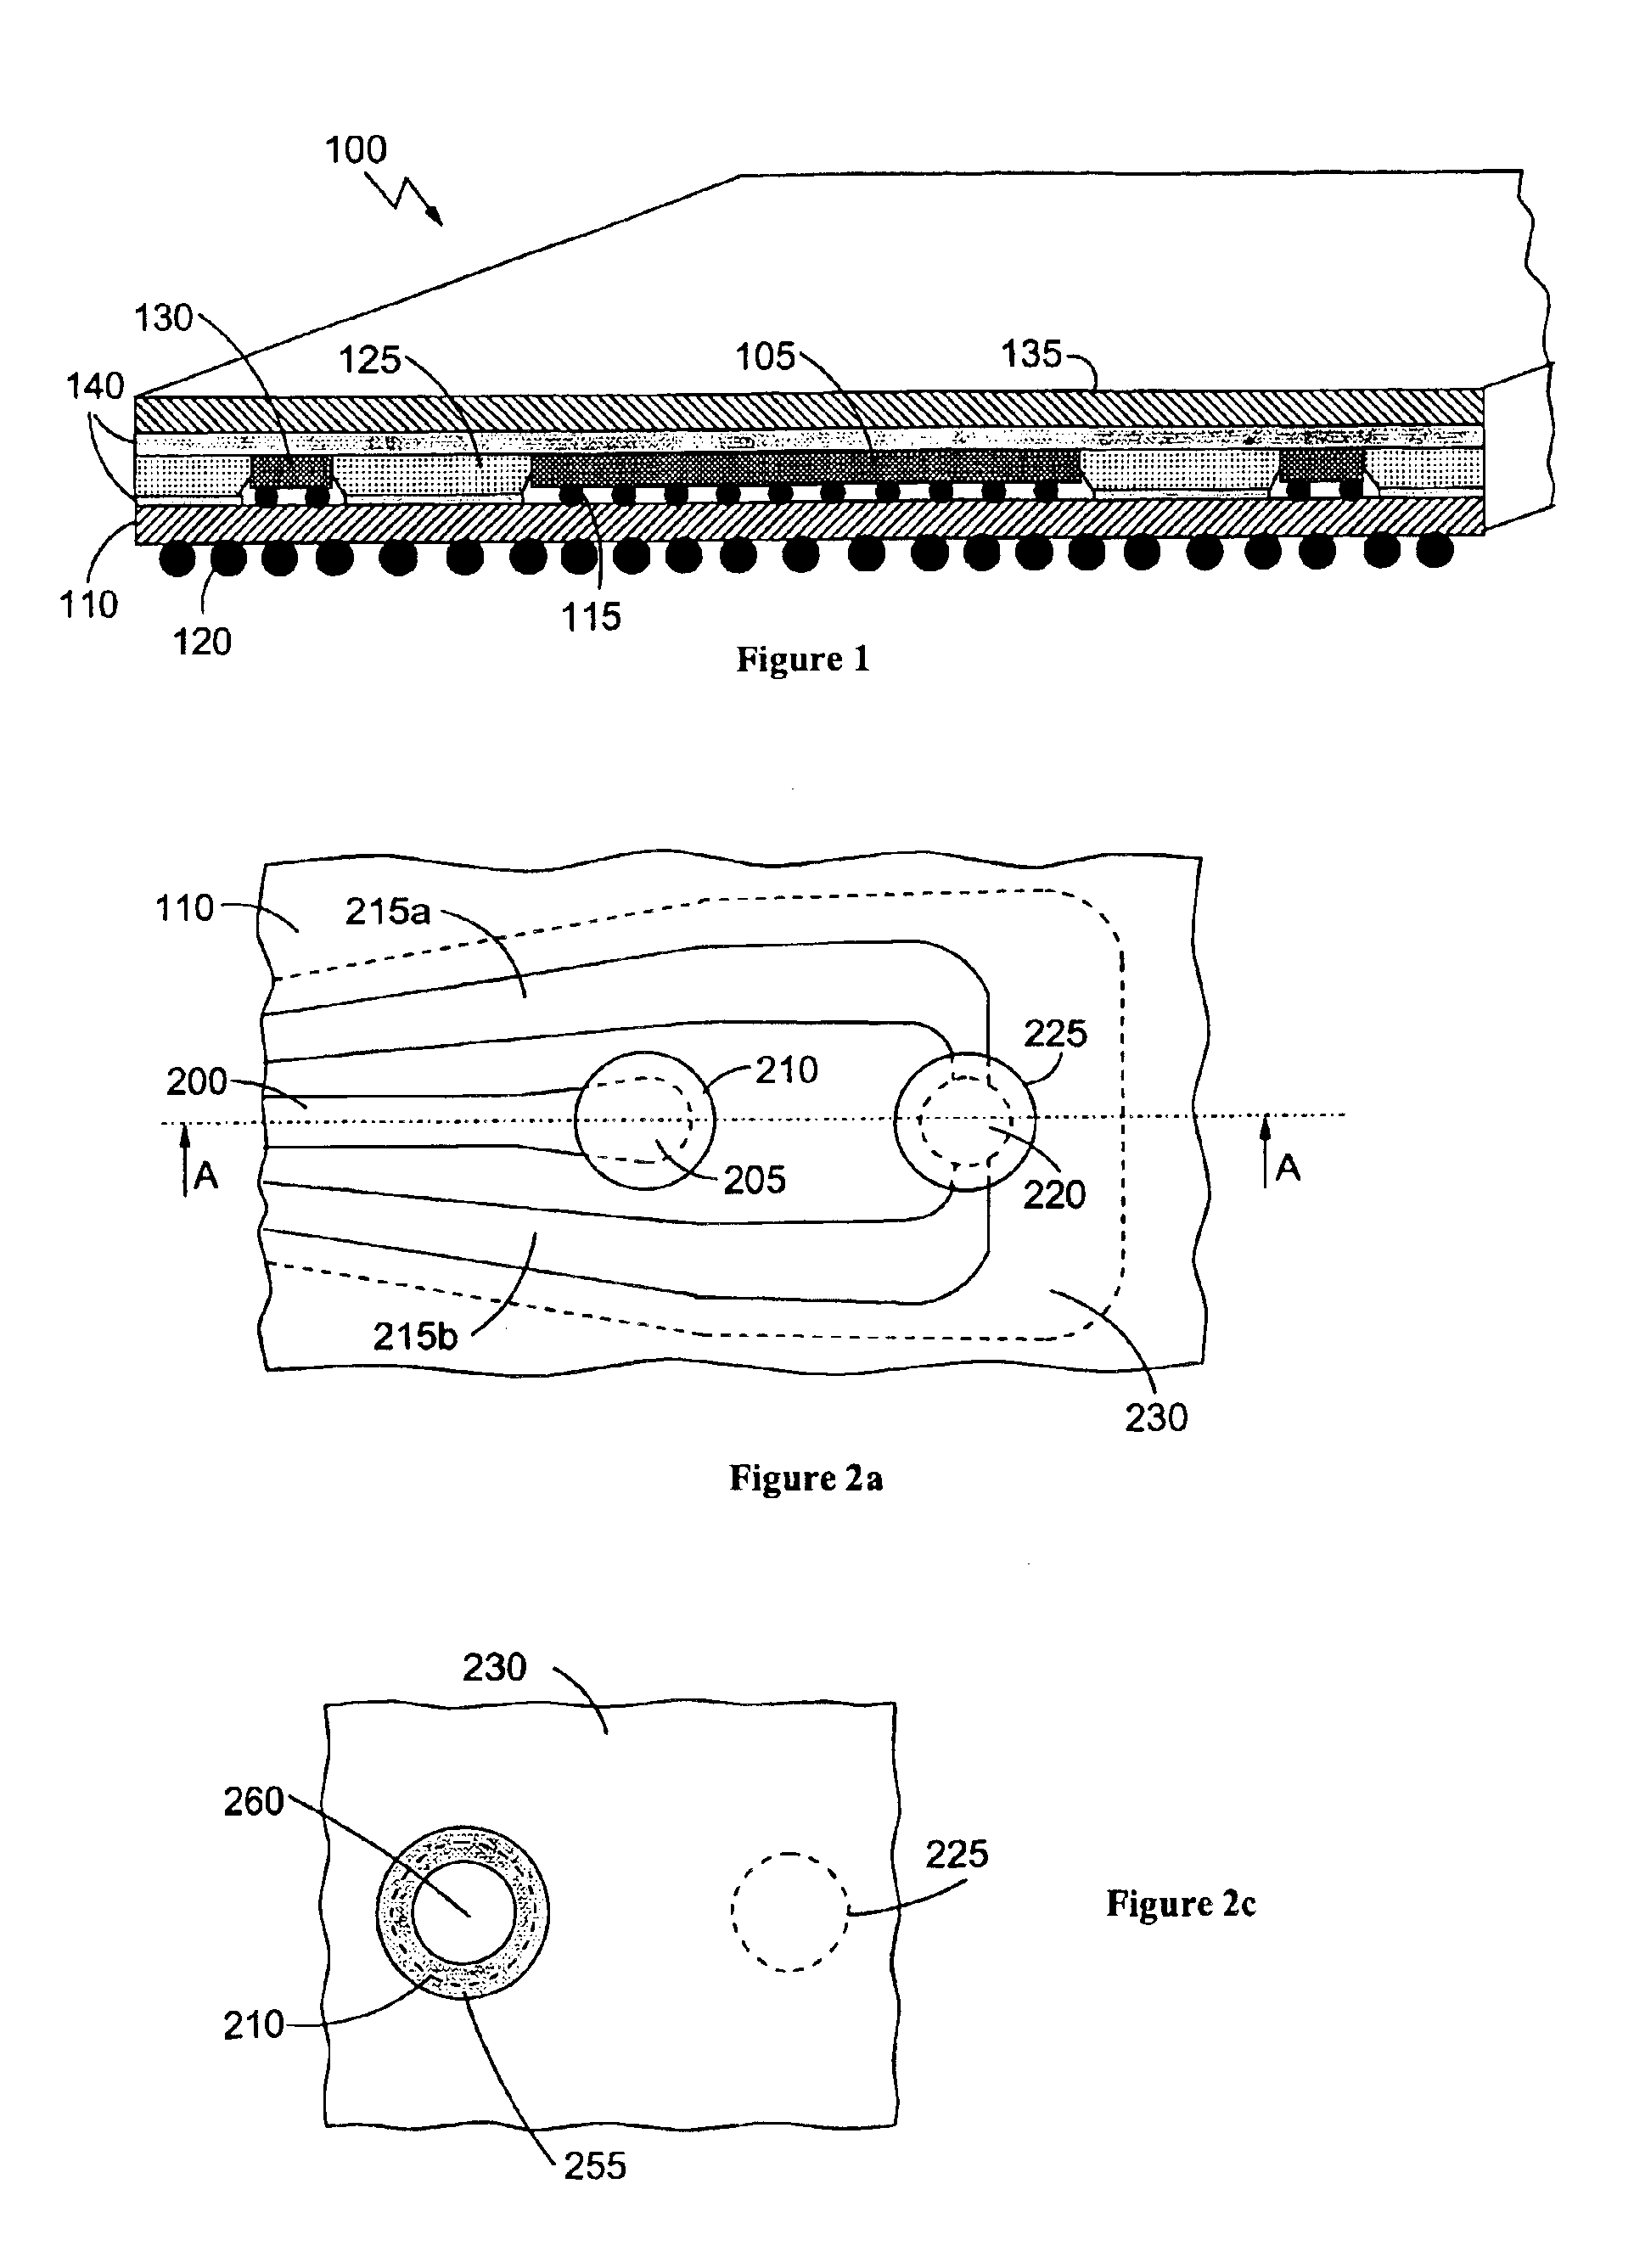 Electronic device carrier adapted for transmitting high frequency signals